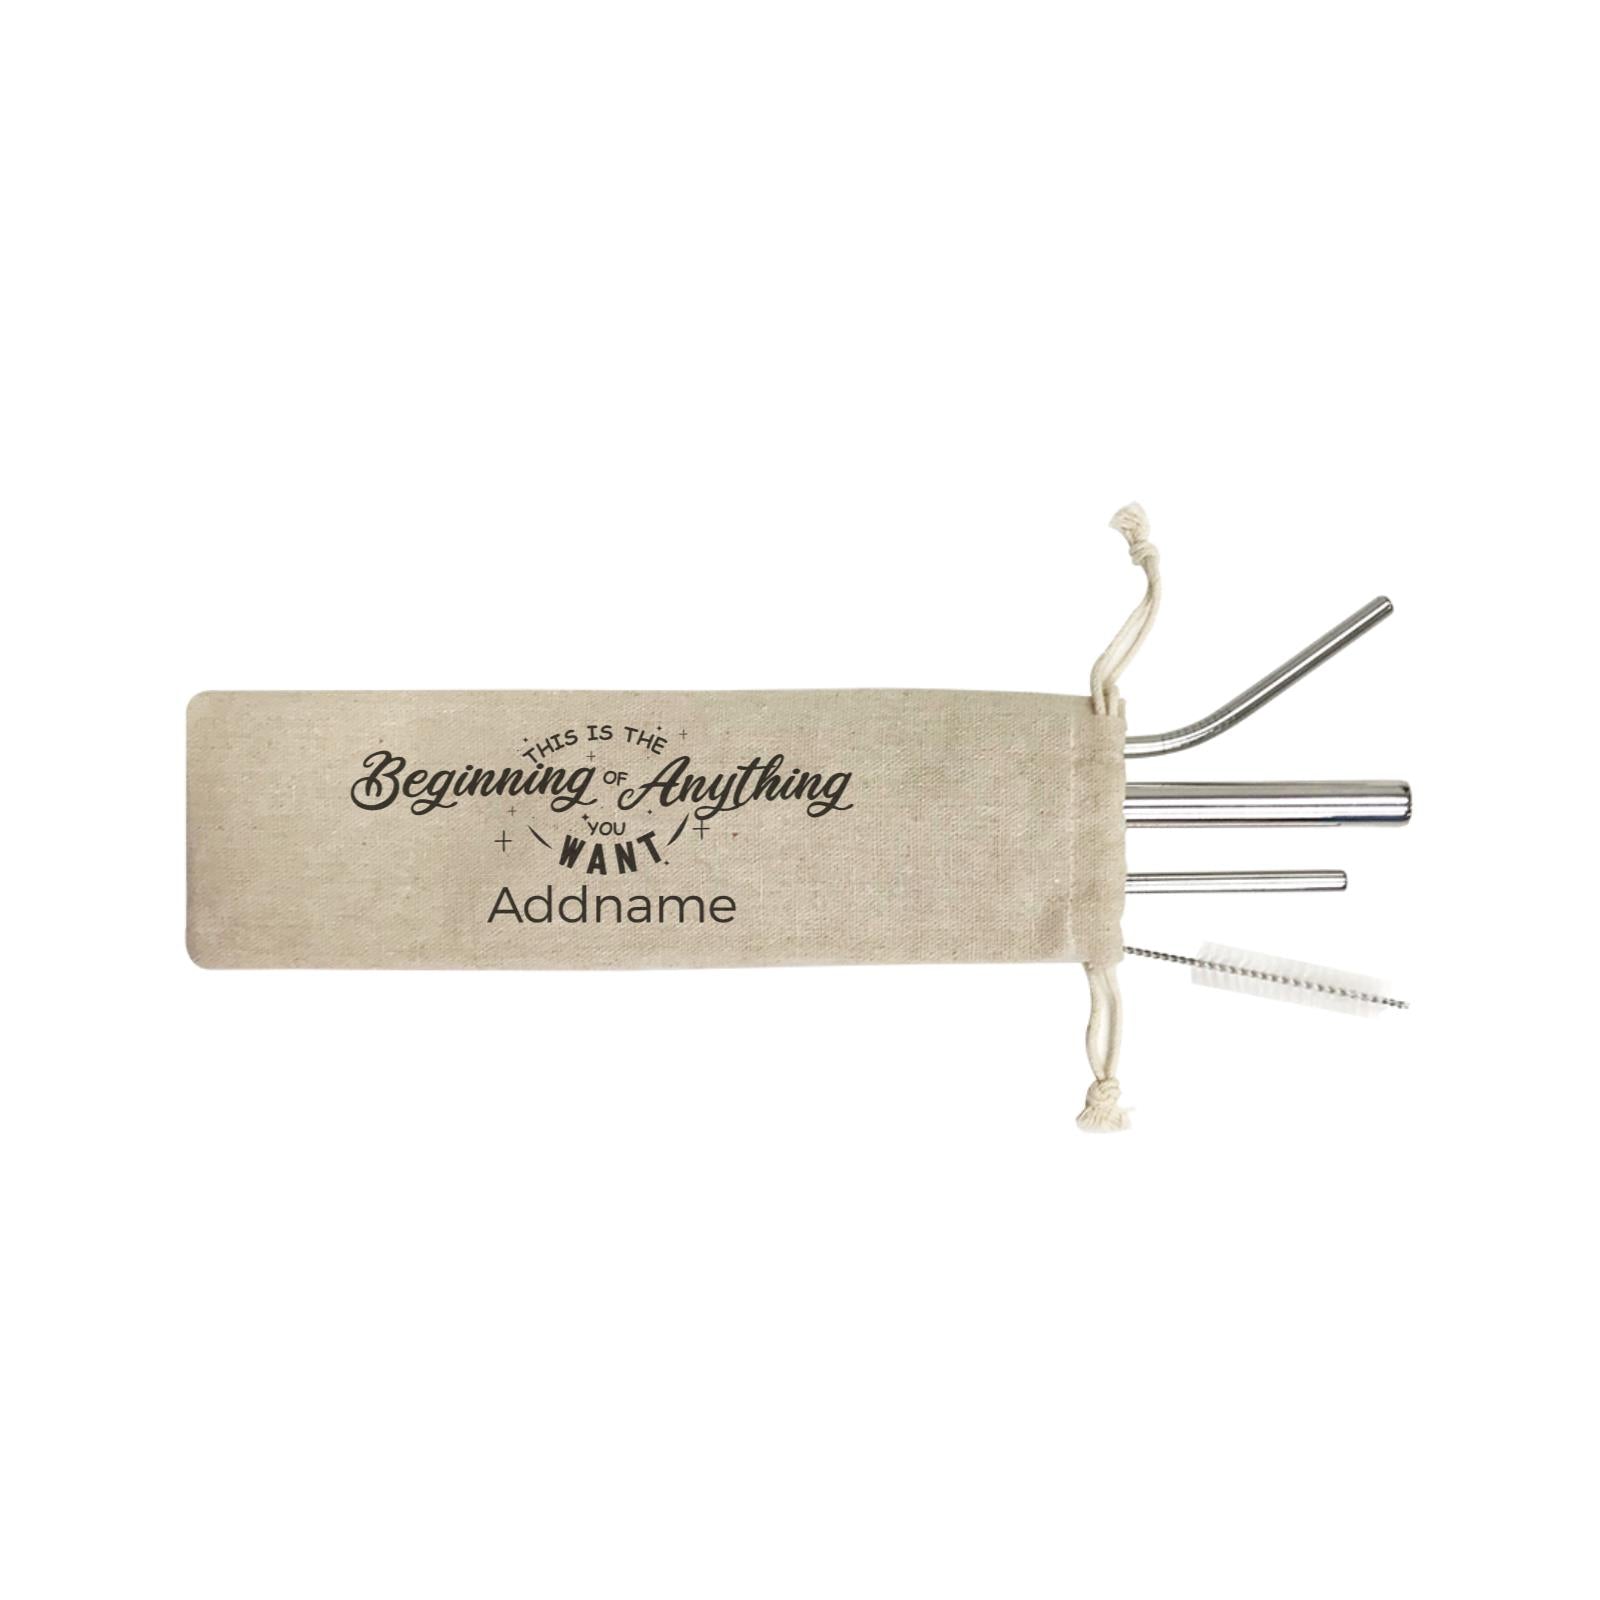 Inspiration Quotes This is the Beginning of Anything You Want Addname SB 4-in-1 Stainless Steel Straw Set In a Satchel